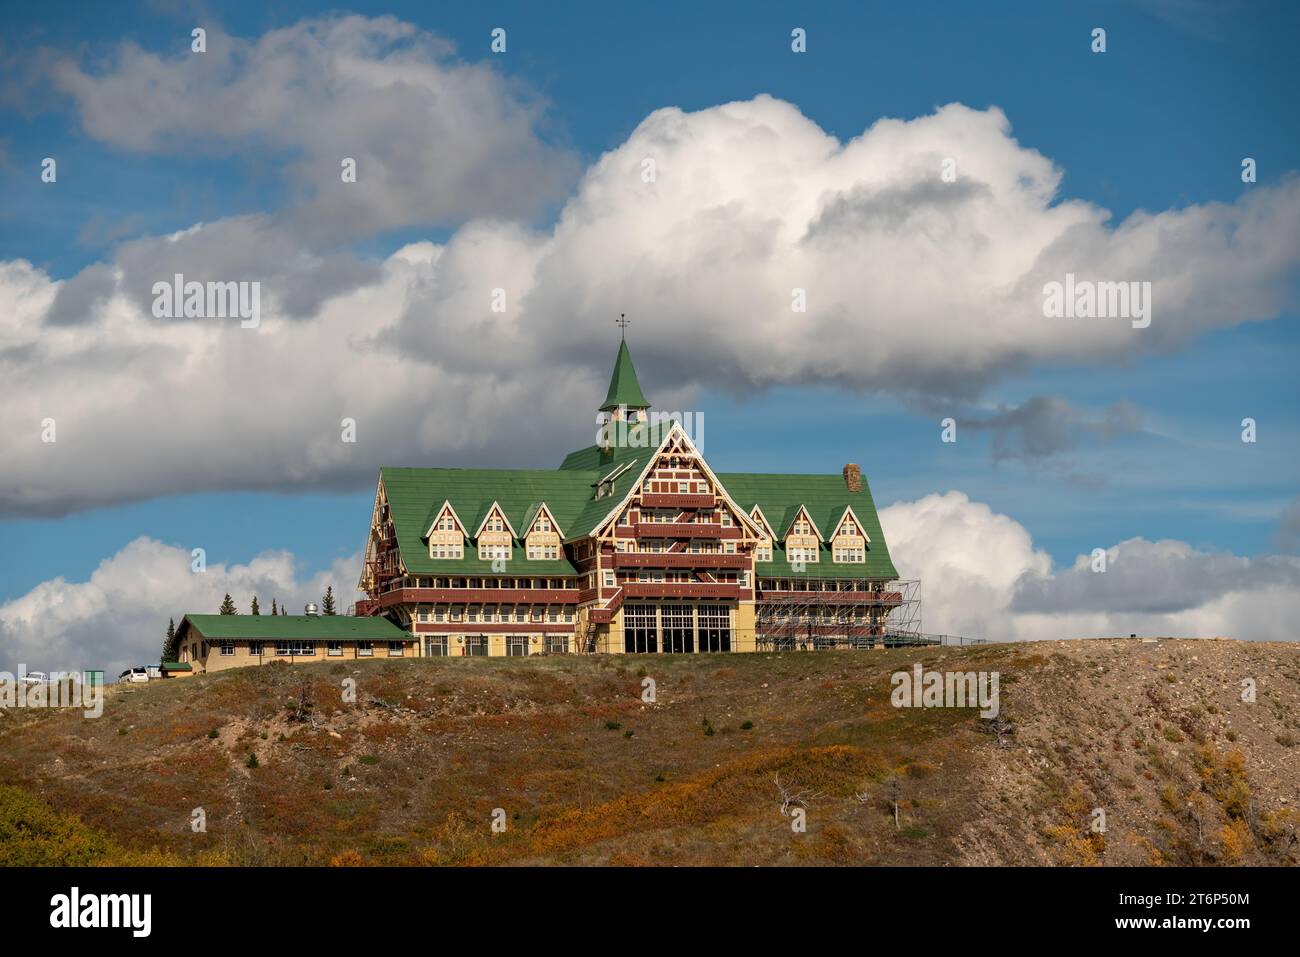 The Prince of Wales Hotel nel Waterton Lakes National Park, Alberta, Canada. Foto Stock